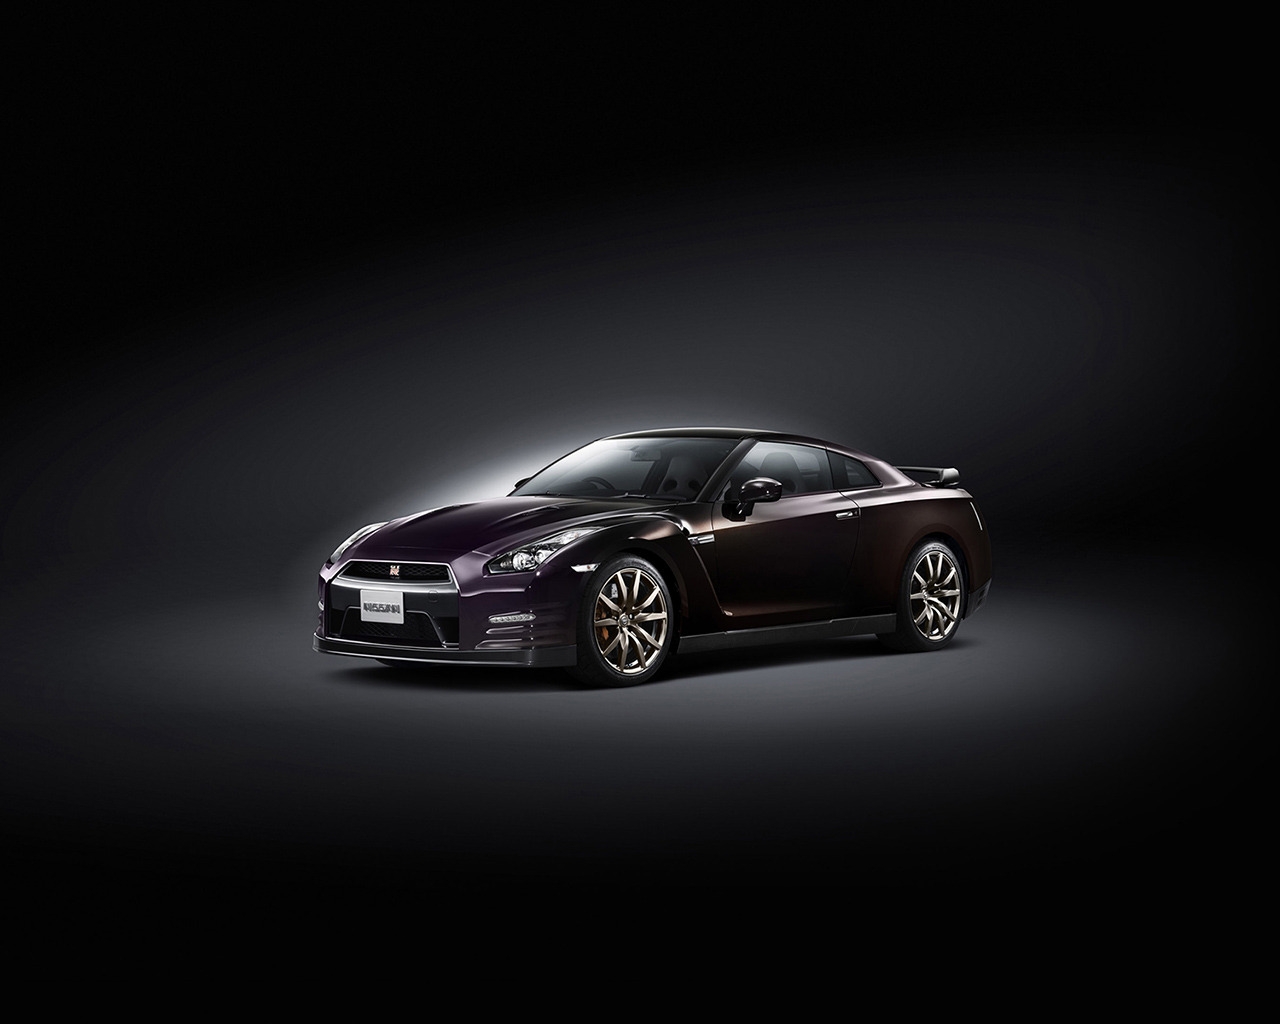 Nissan GT-R Special Edition 2014 for 1280 x 1024 resolution